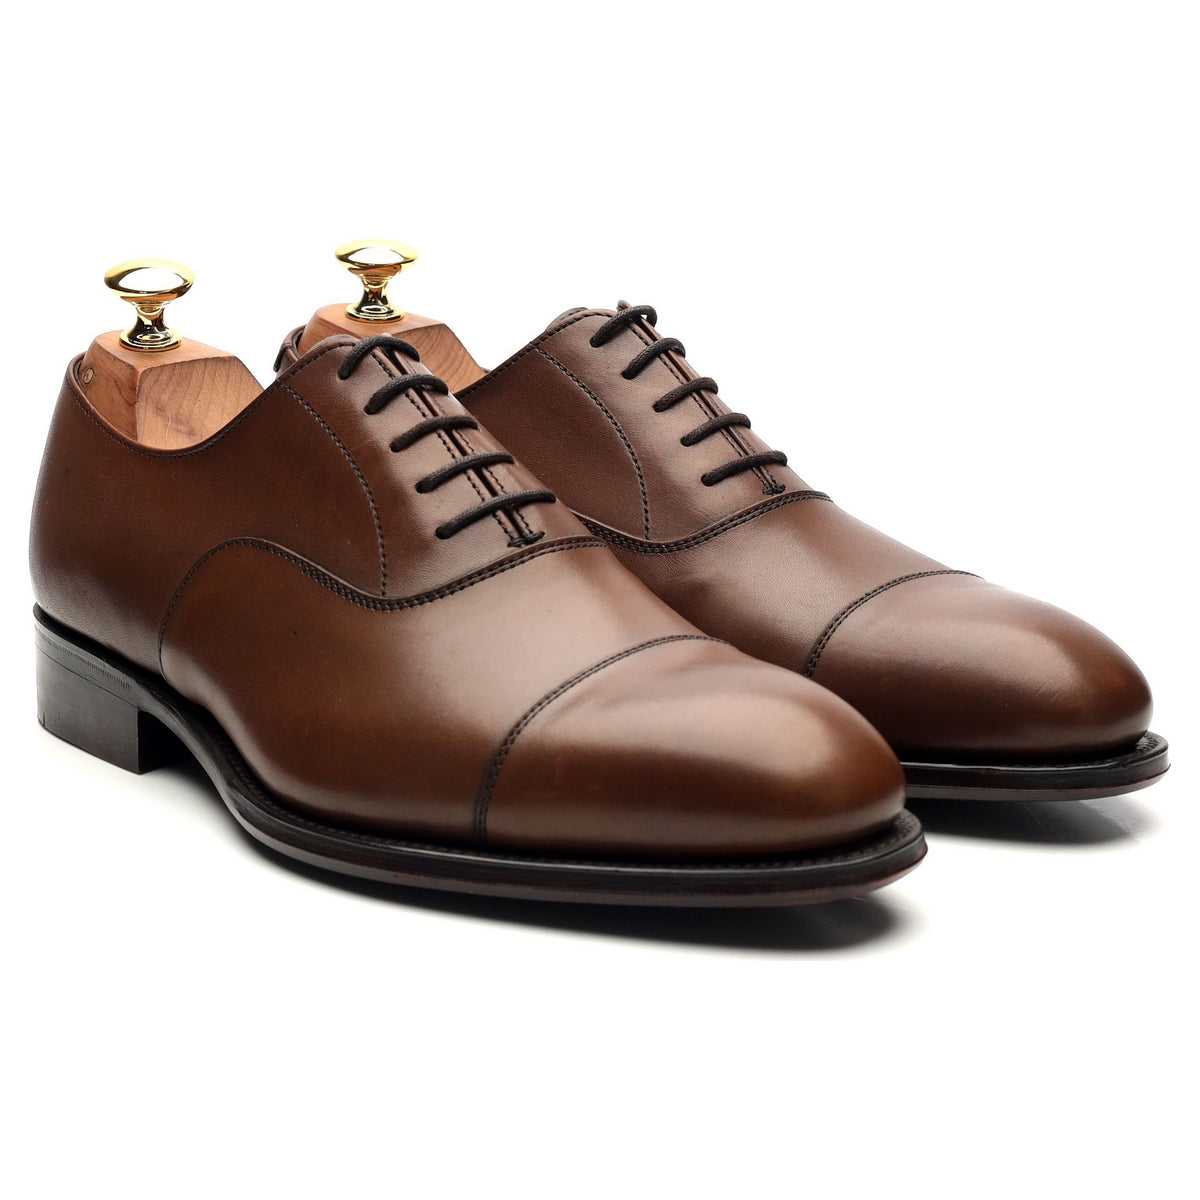 Brown Leather Oxford UK 7.5 DX